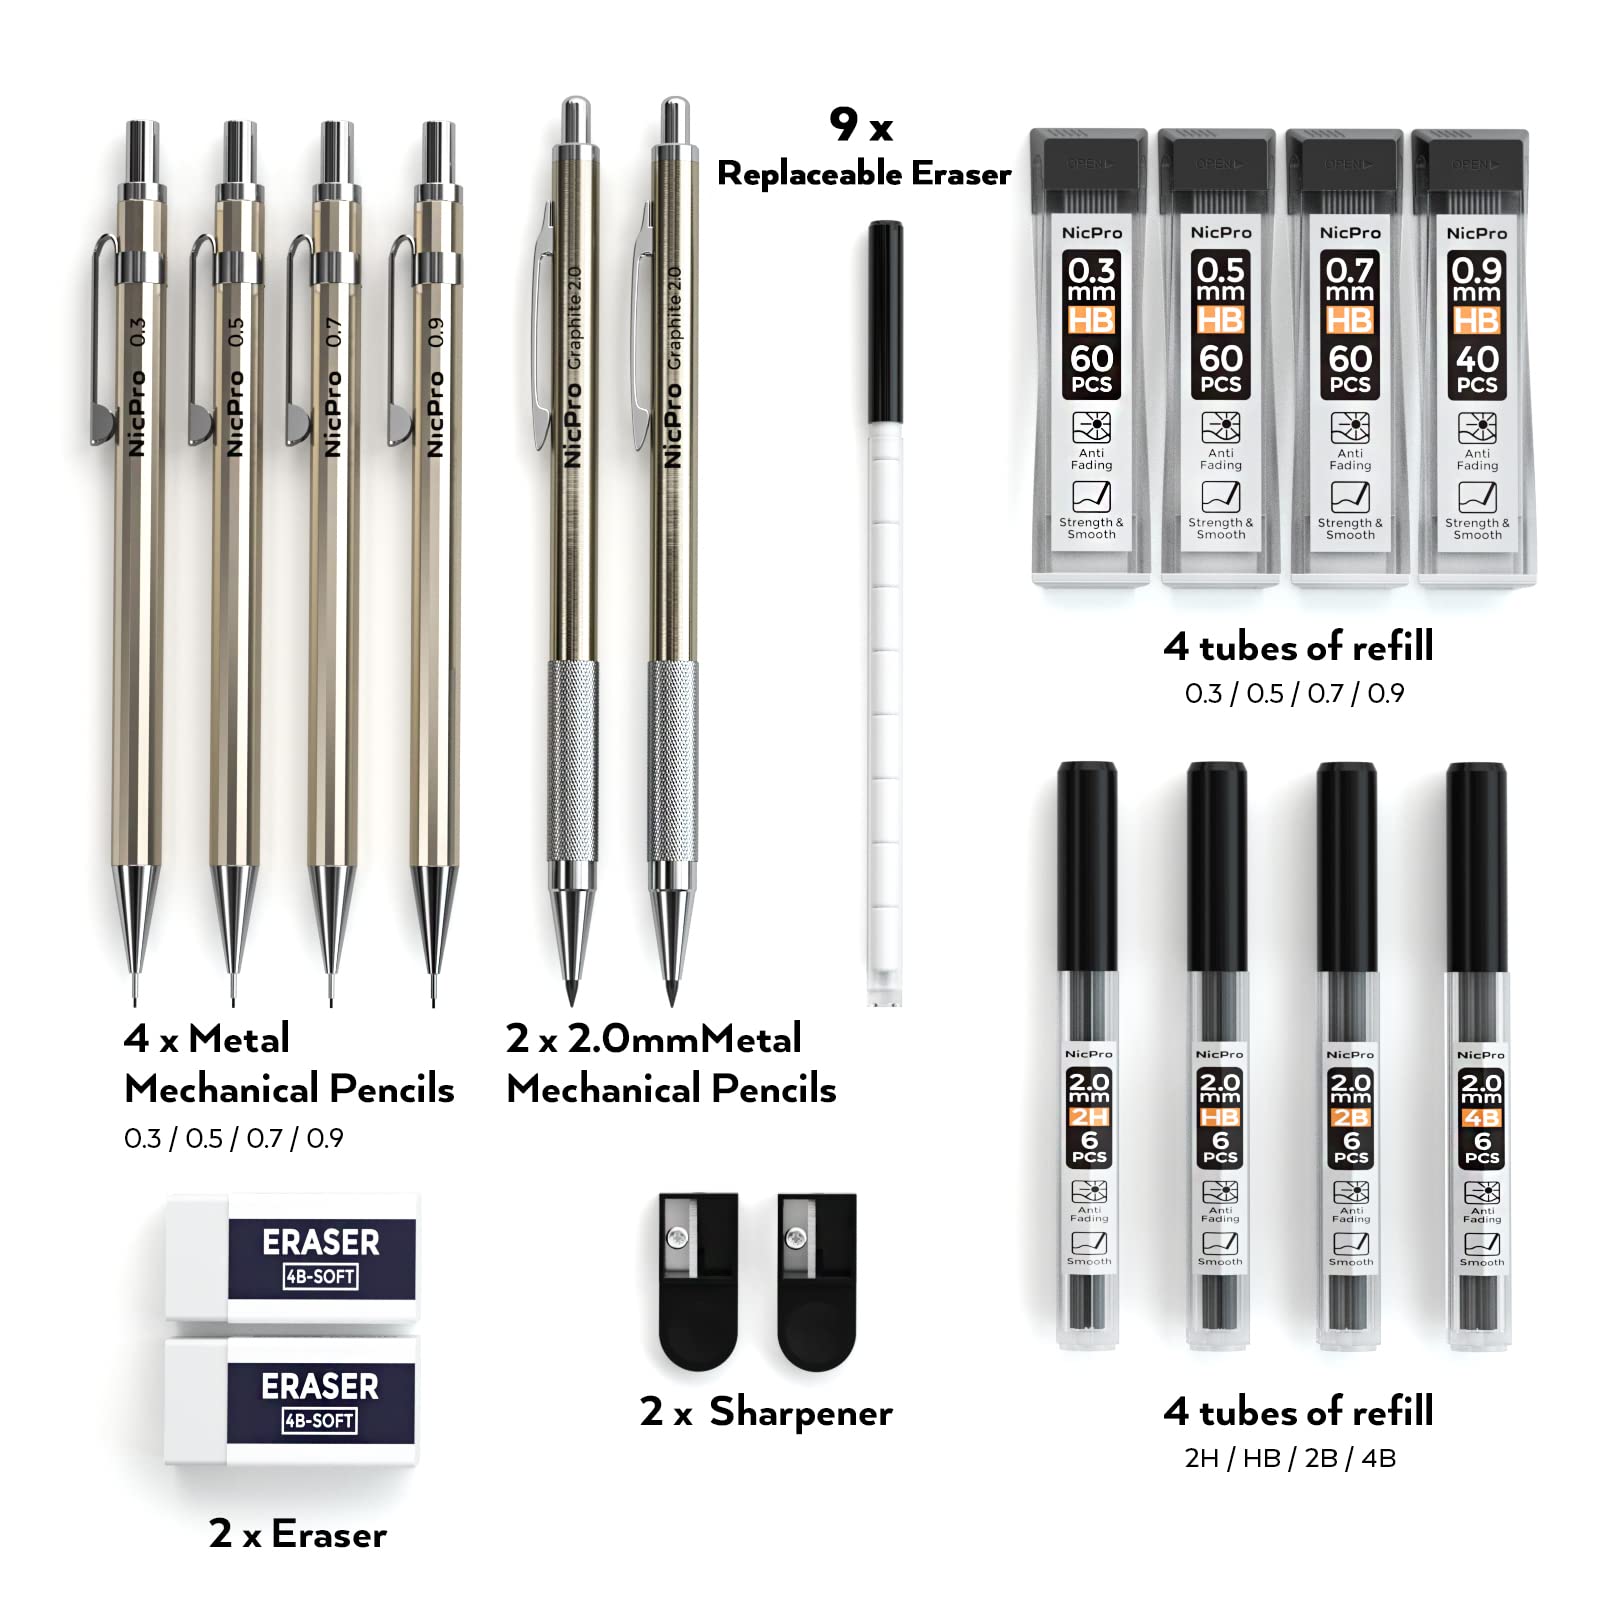 Nicpro 6 PCS Art Mechanical Pencils Set Metal, Artist Drafting Pencil 0.3 & 0.5 & 0.7 & 0.9 mm and 2mm Lead Holder For Art Writing, Sketching Drawing,With 8 Tubes Lead Refills Erasers Sharpener